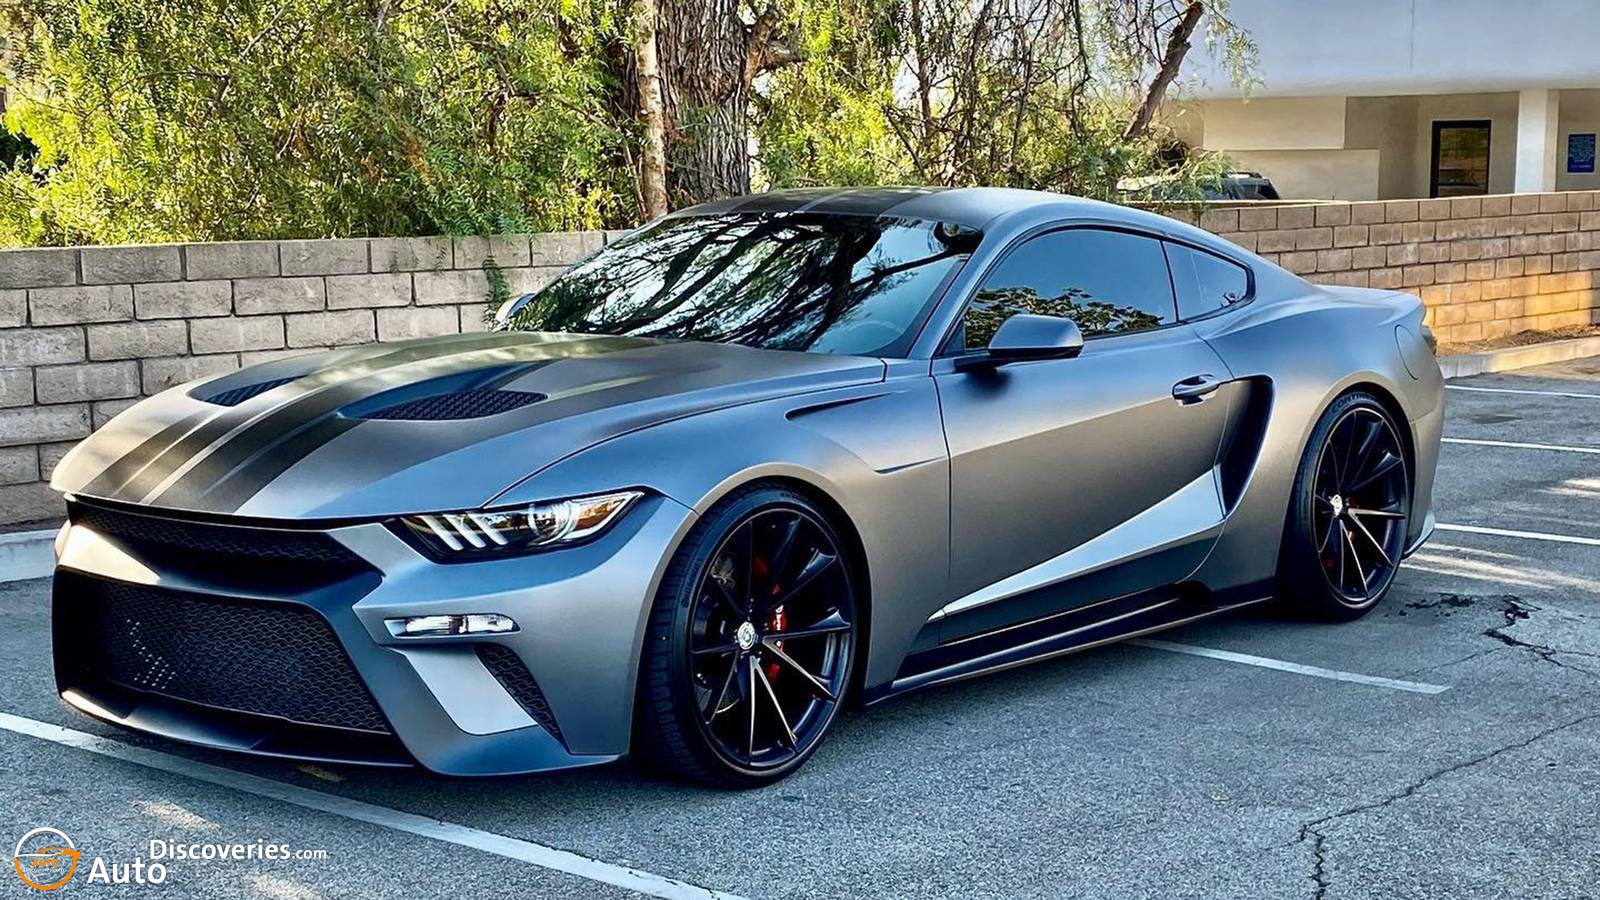 Meet The New Ford Mustang 2023! Auto Discoveries